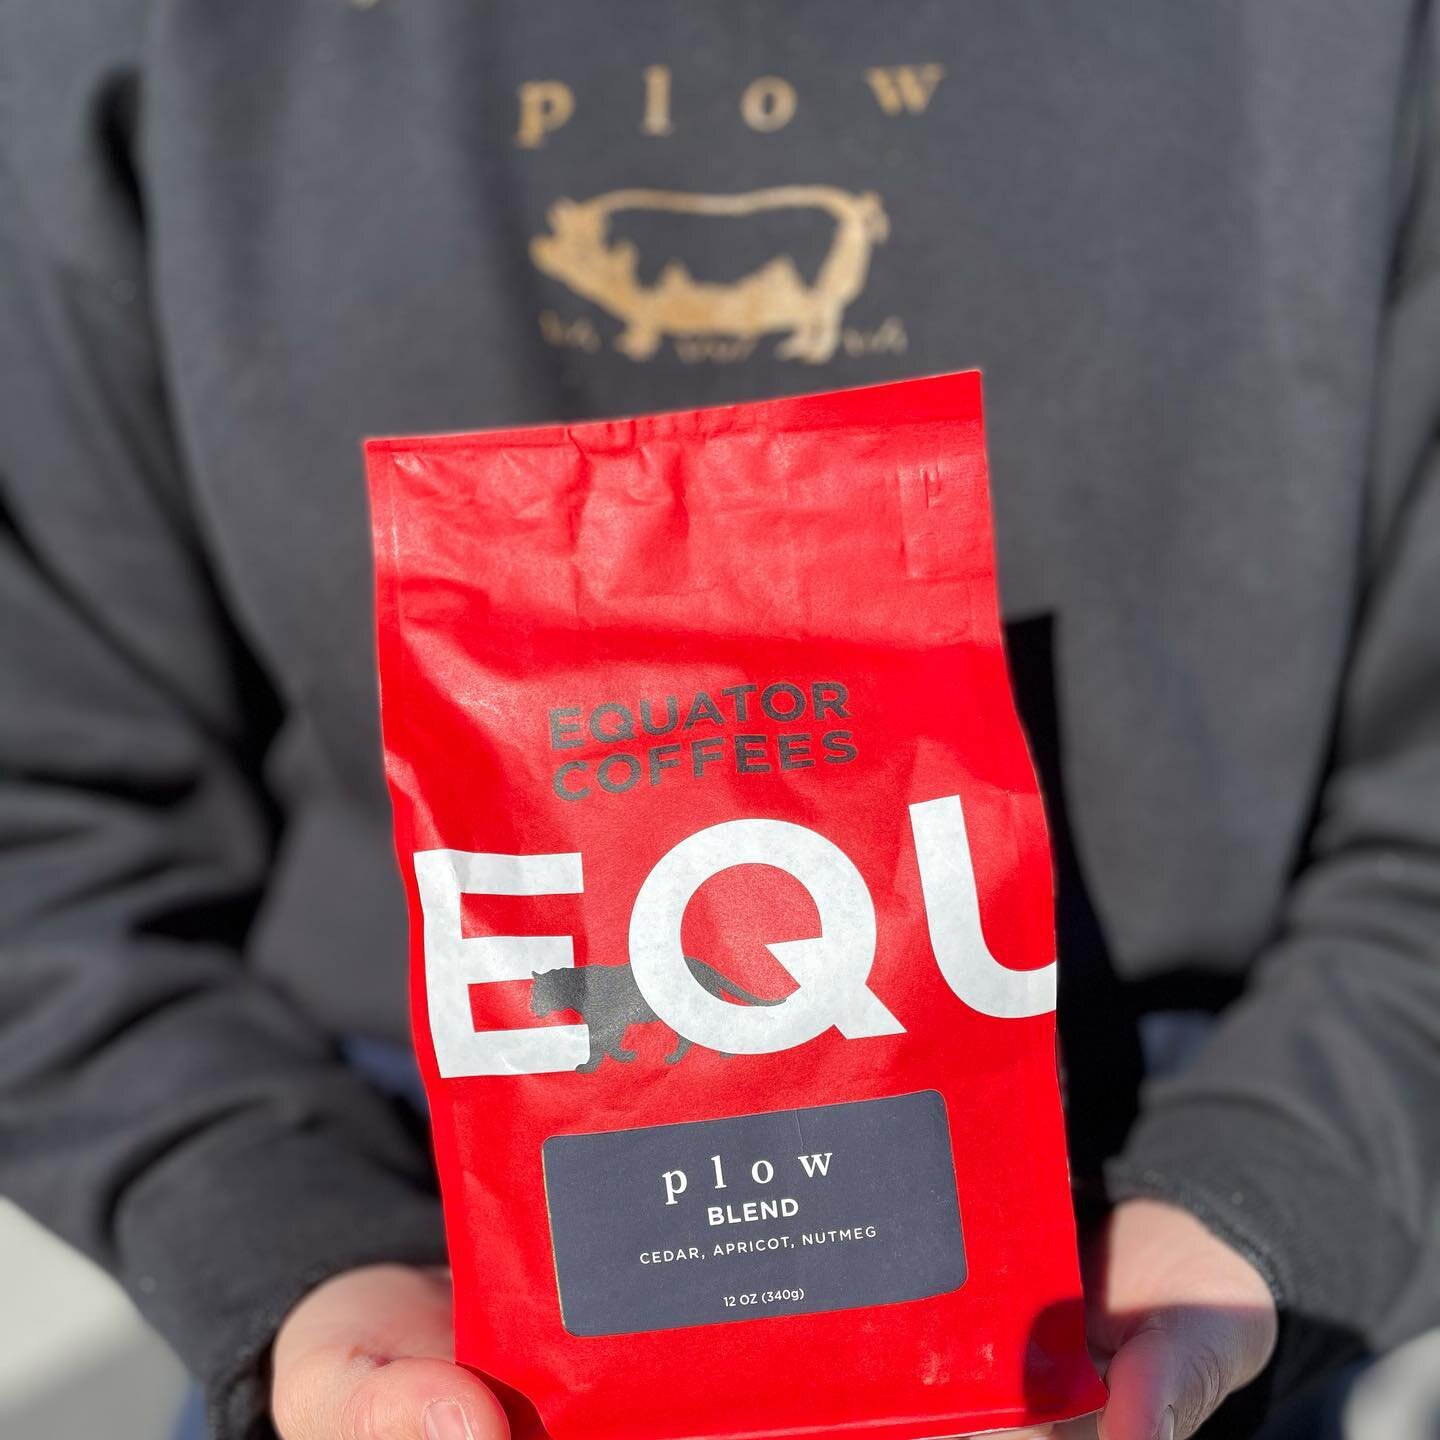 Our very own plow blend now available in retail packs!